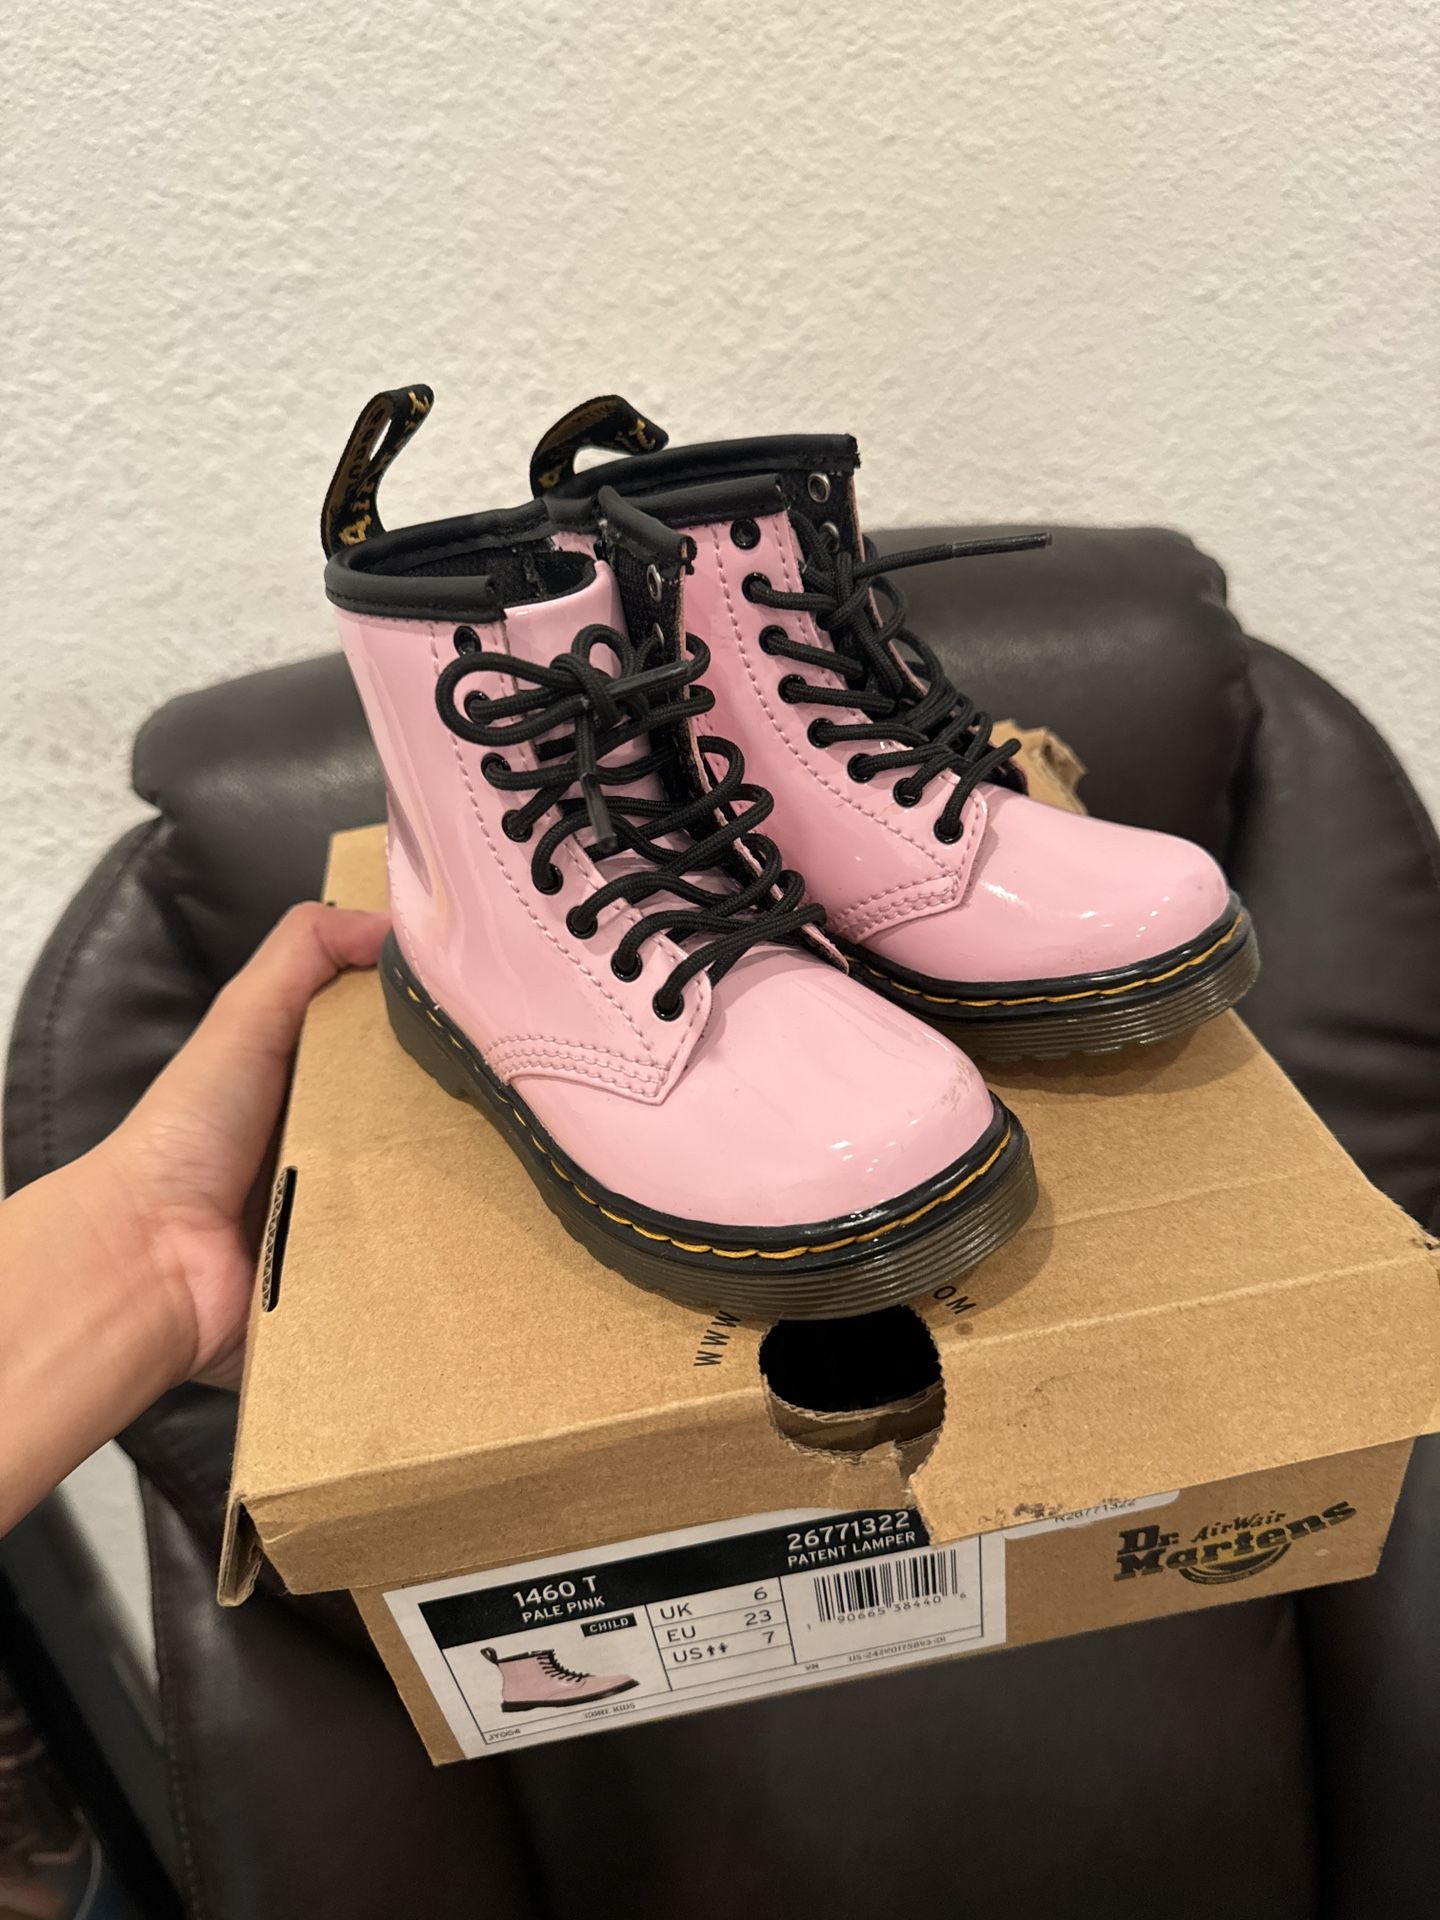 DR MARTENS TODDLER PINK BOOTS SIZE US 7 ORIG BOX INCLUDE